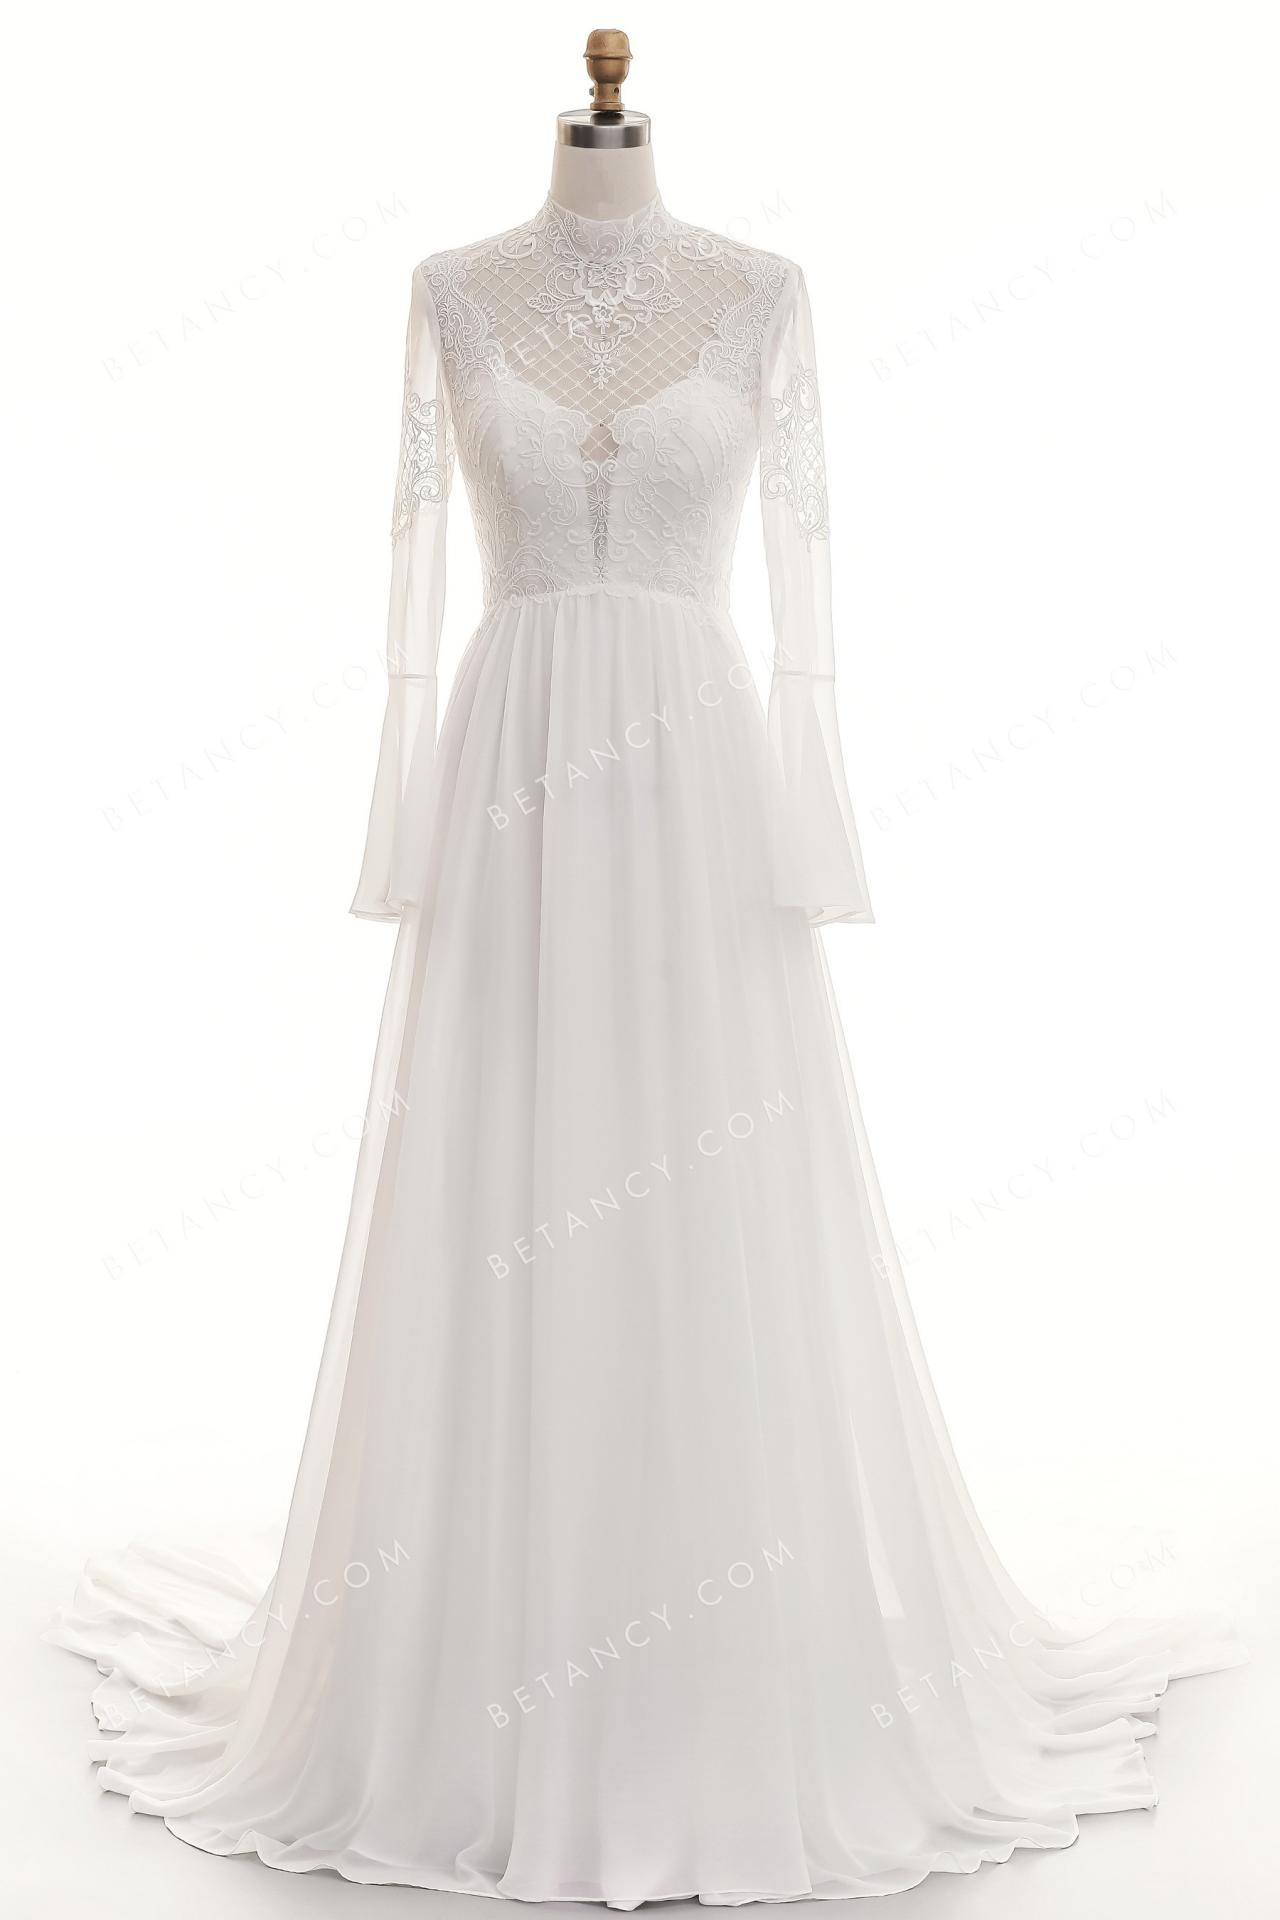 Bohemian wedding dress with illusion high neck and bell sleeves 4